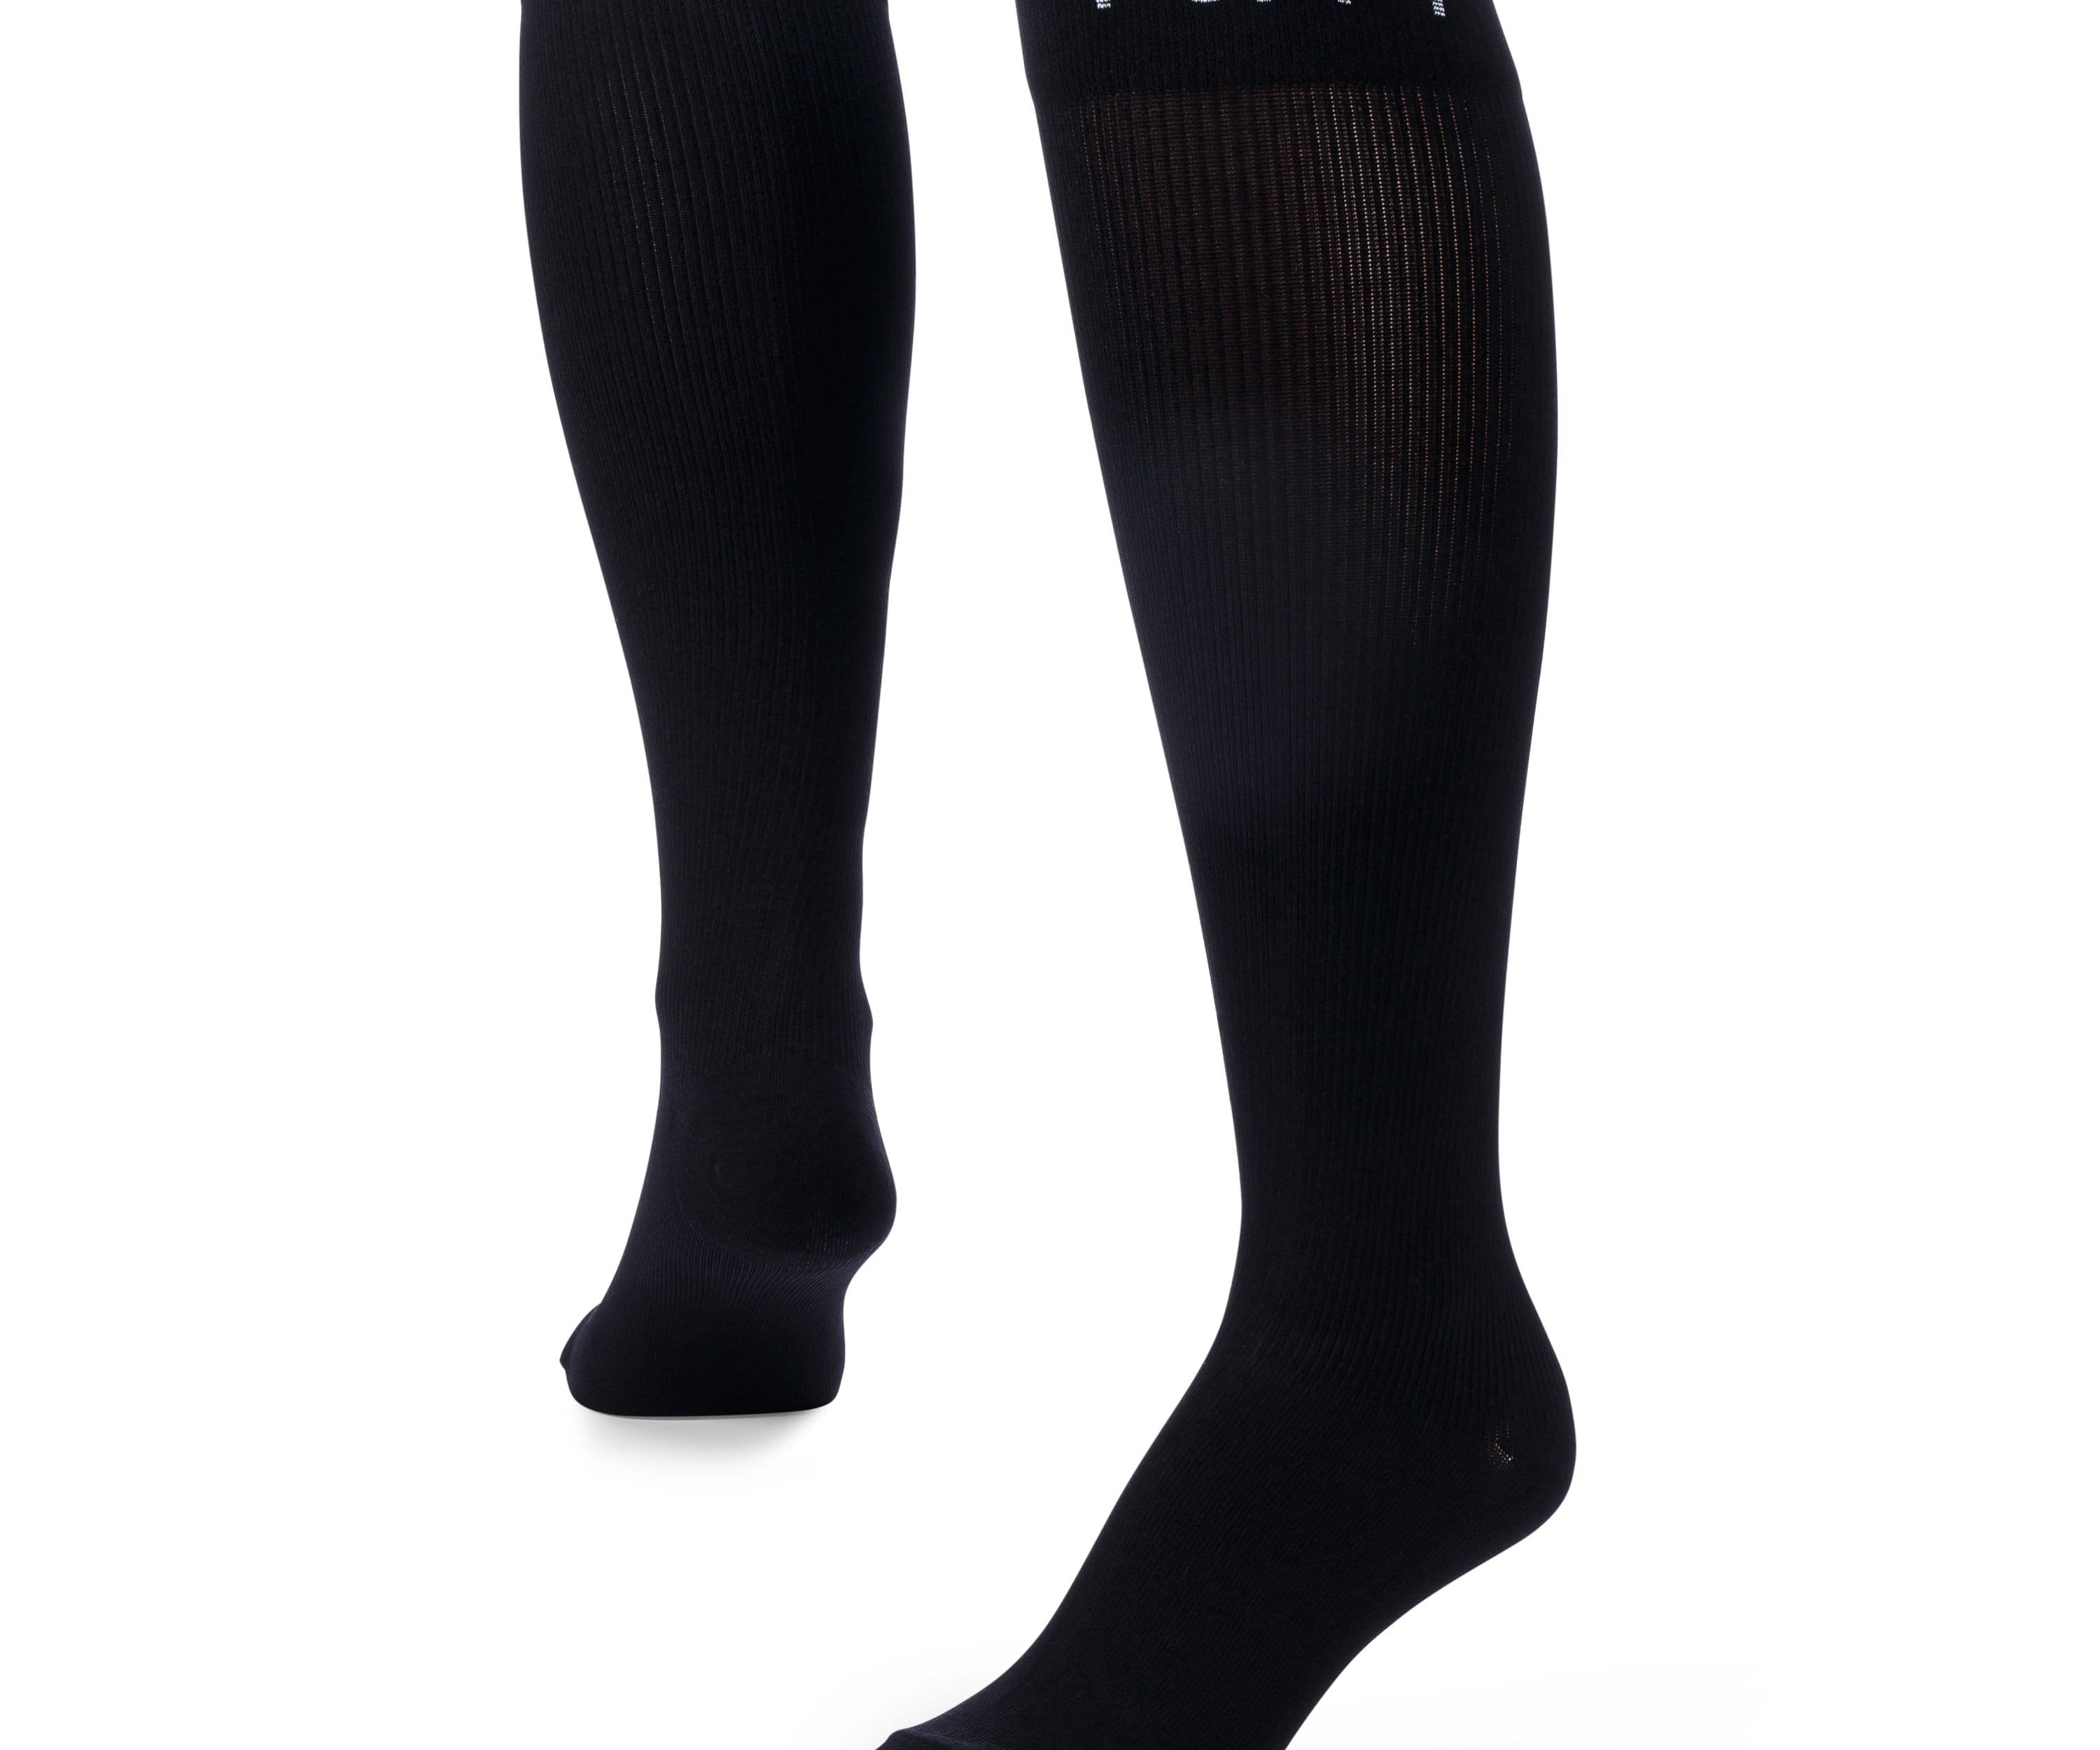 Ankle and heel detail photo for premium black compression socks.